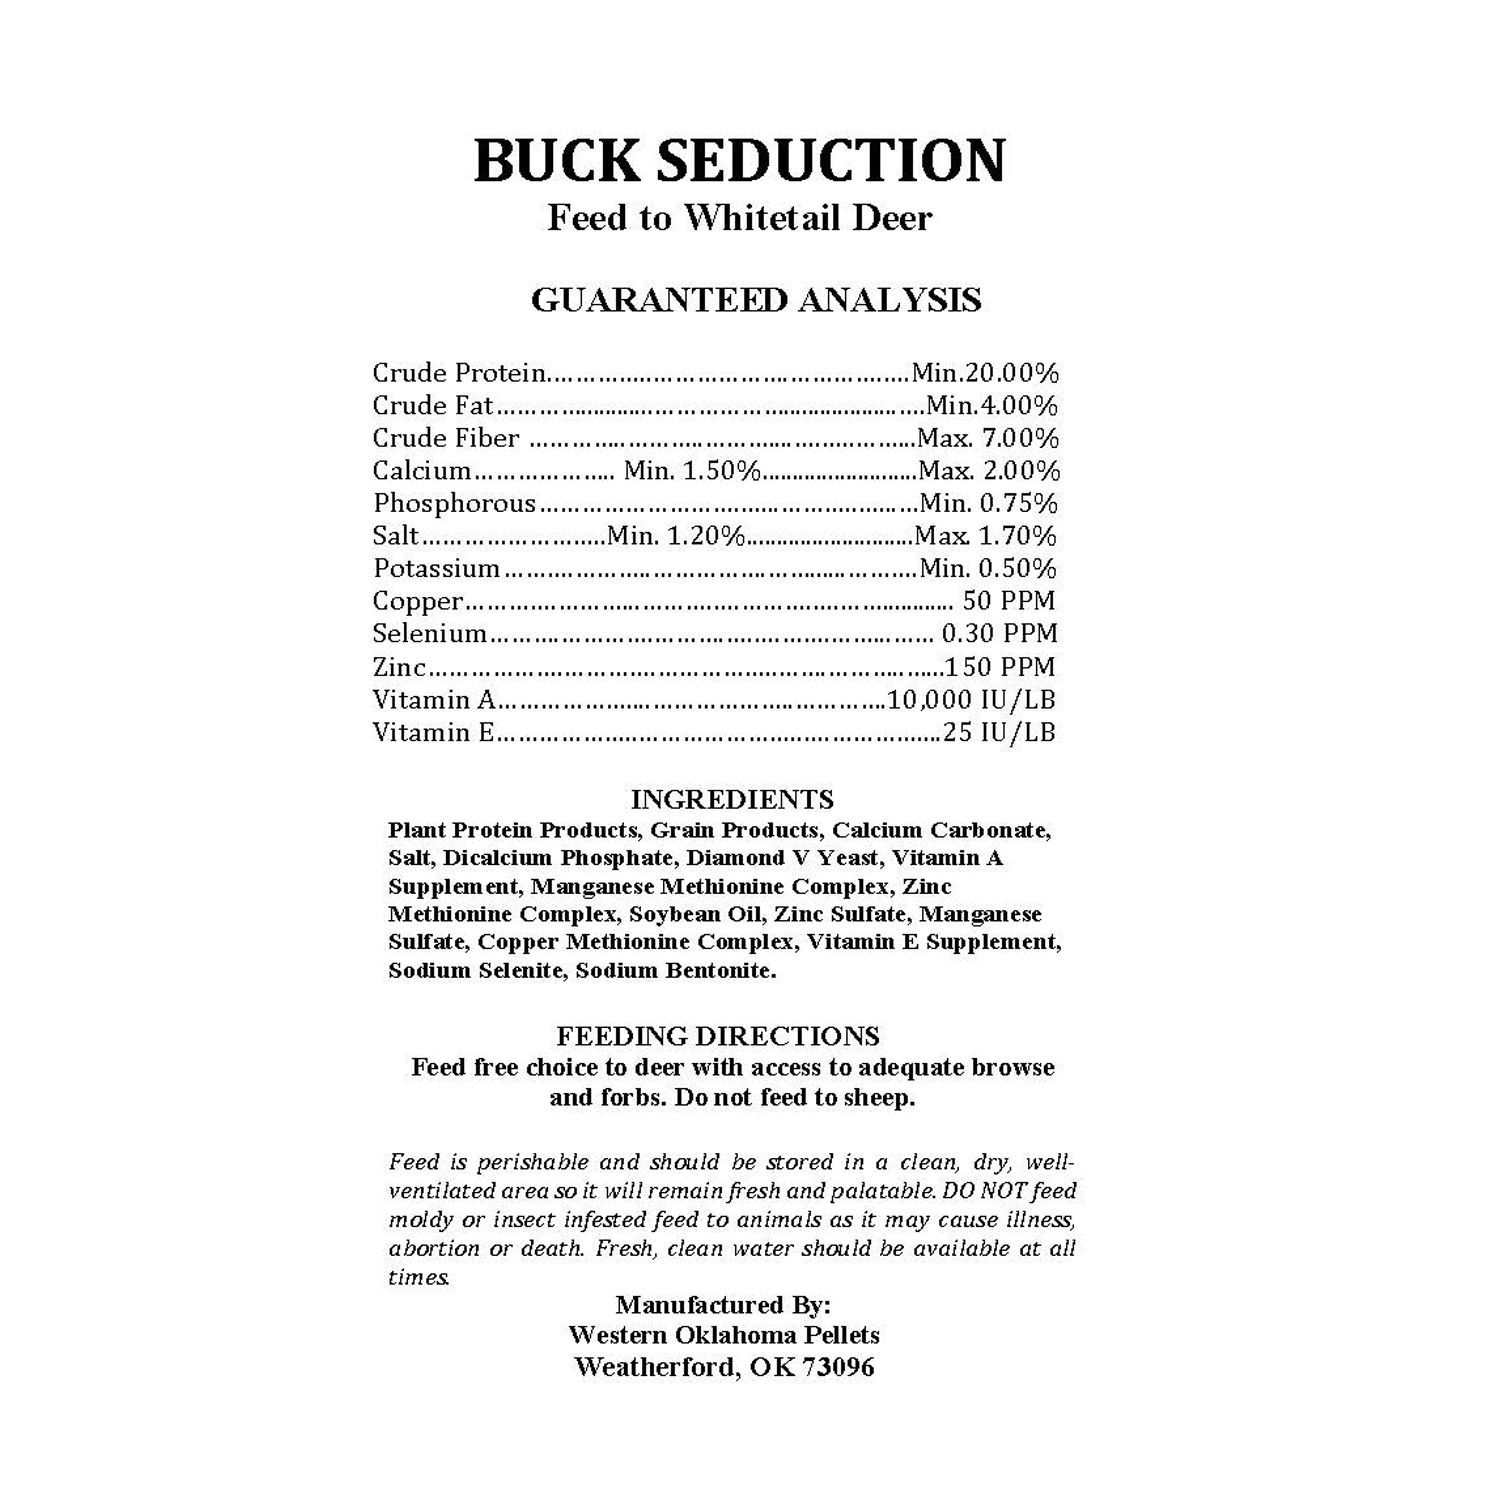 A page of a buck seduction feed for whitetail deer.